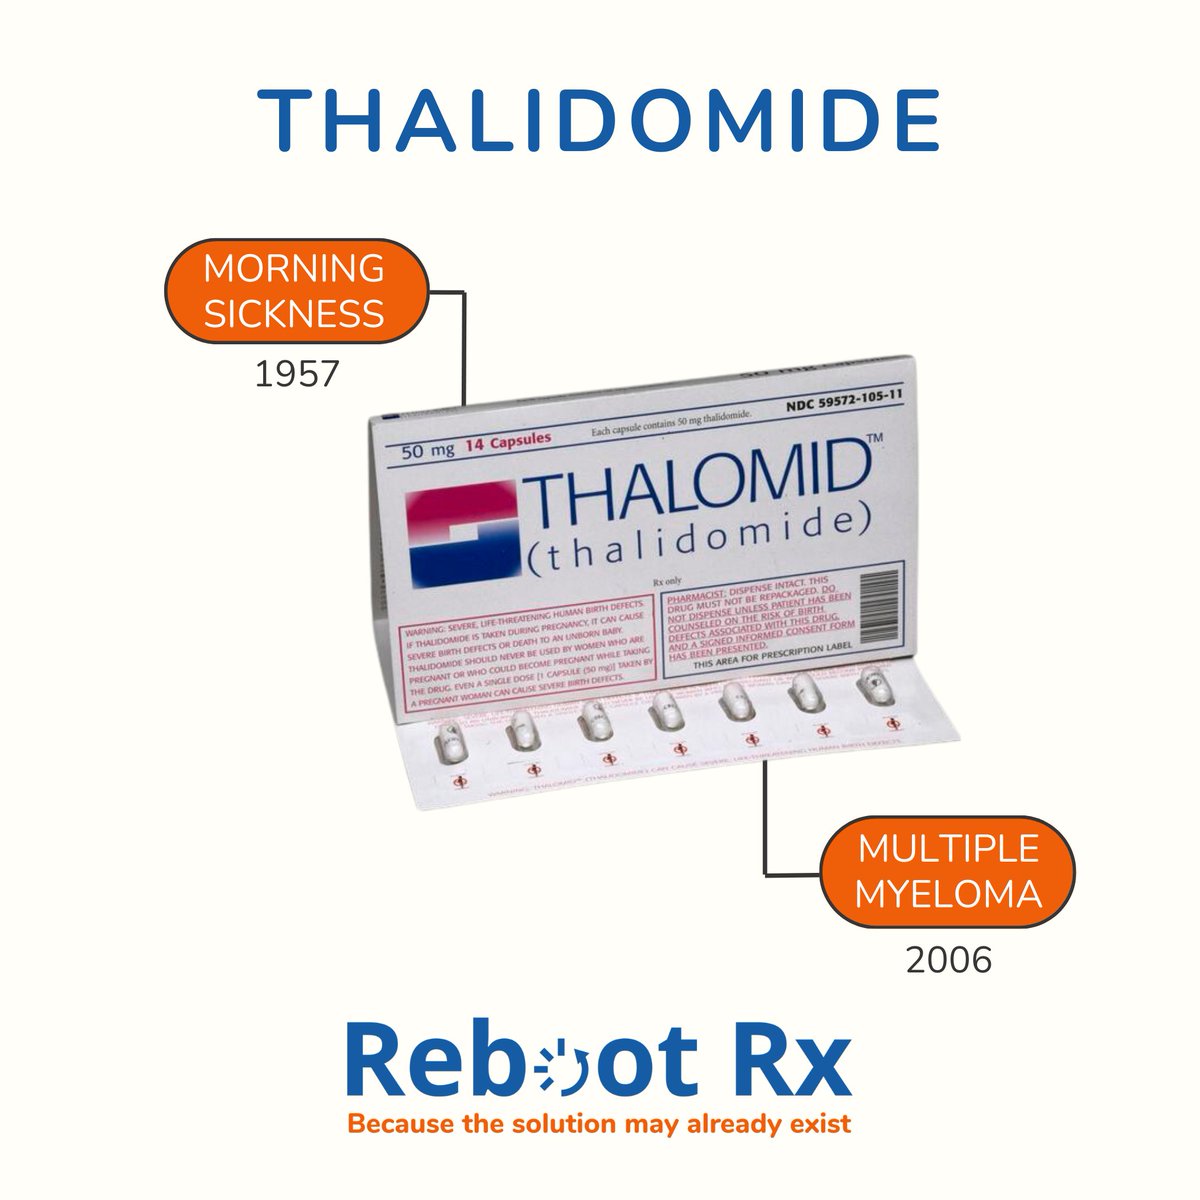 Thalidomide was once used to treat pregnancy-related morning sickness but was recalled due to causing birth defects. It made a groundbreaking comeback when it was repurposed for treating #multiplemyeloma as an immunomodulatory drug. #drugrepurposing @theMMRF